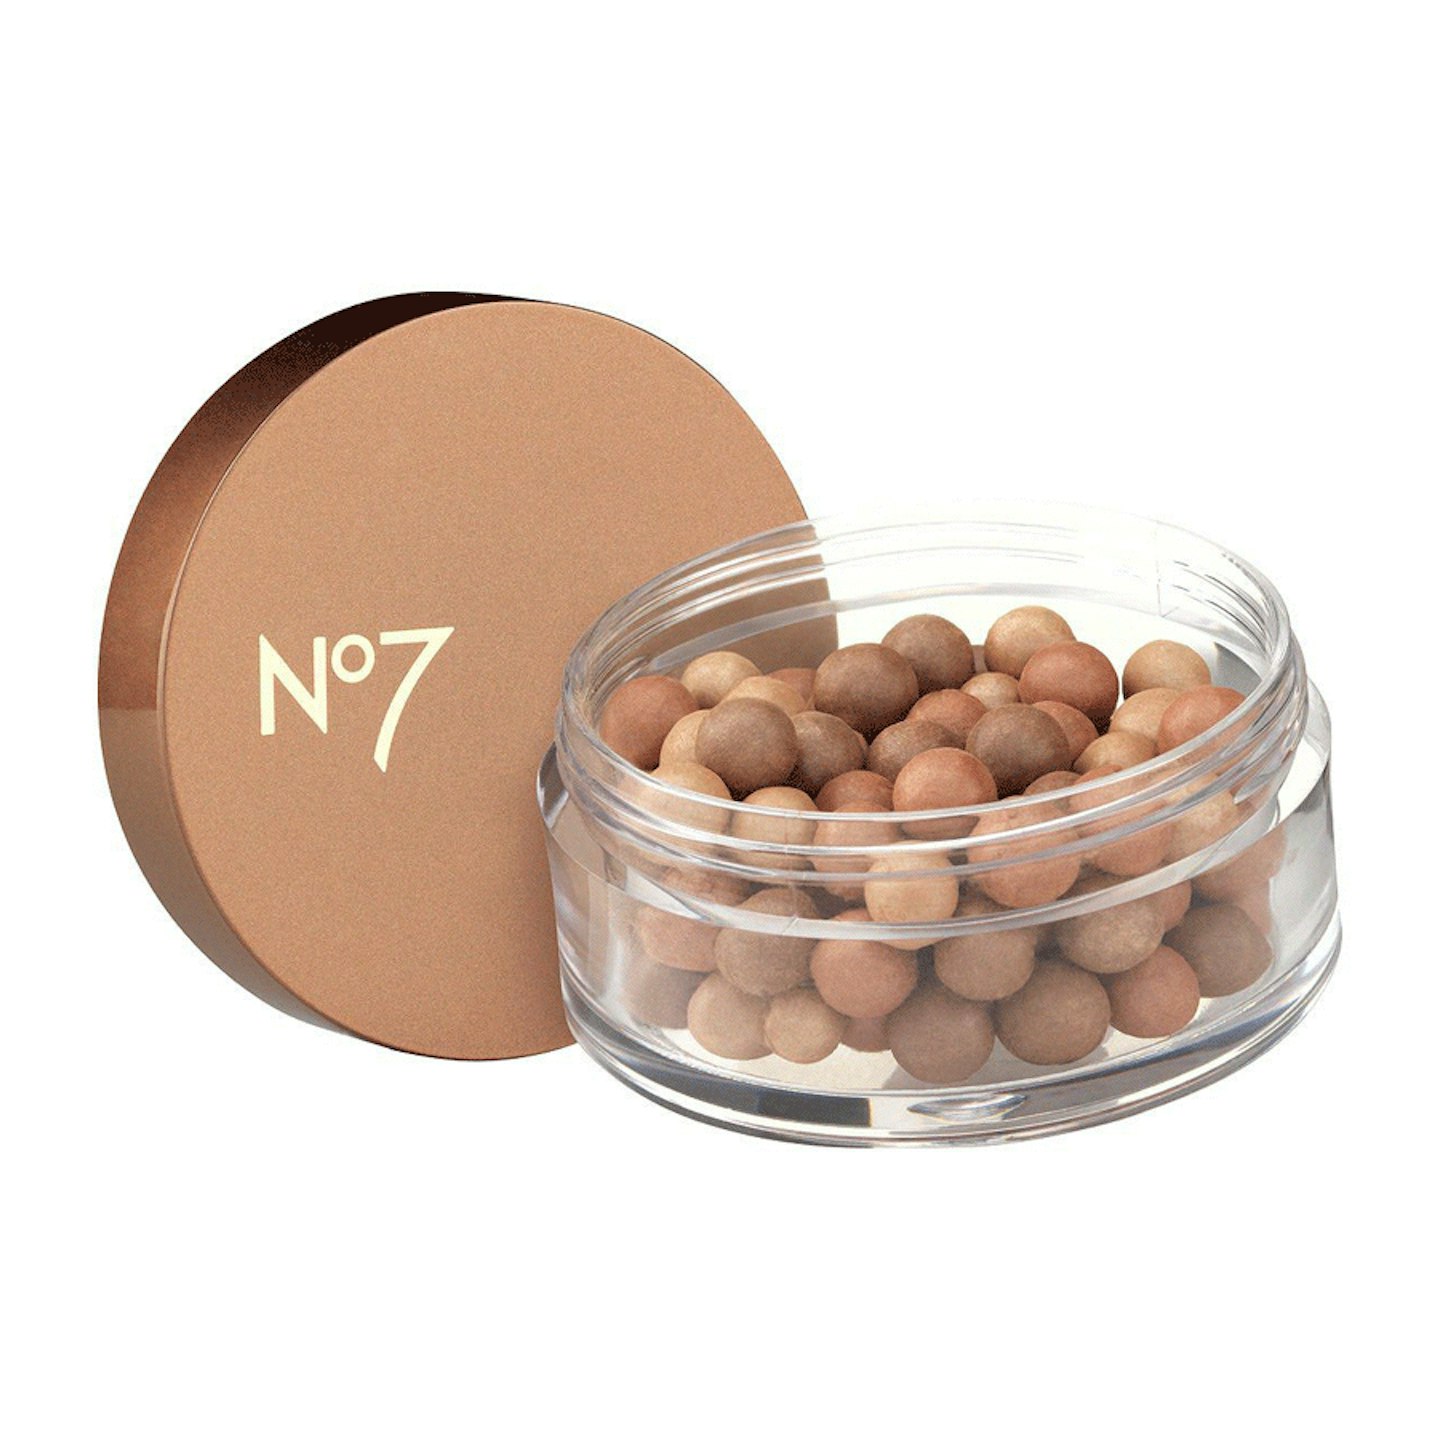 No7 Perfectly Bronzed Bronzing Pearls, £10